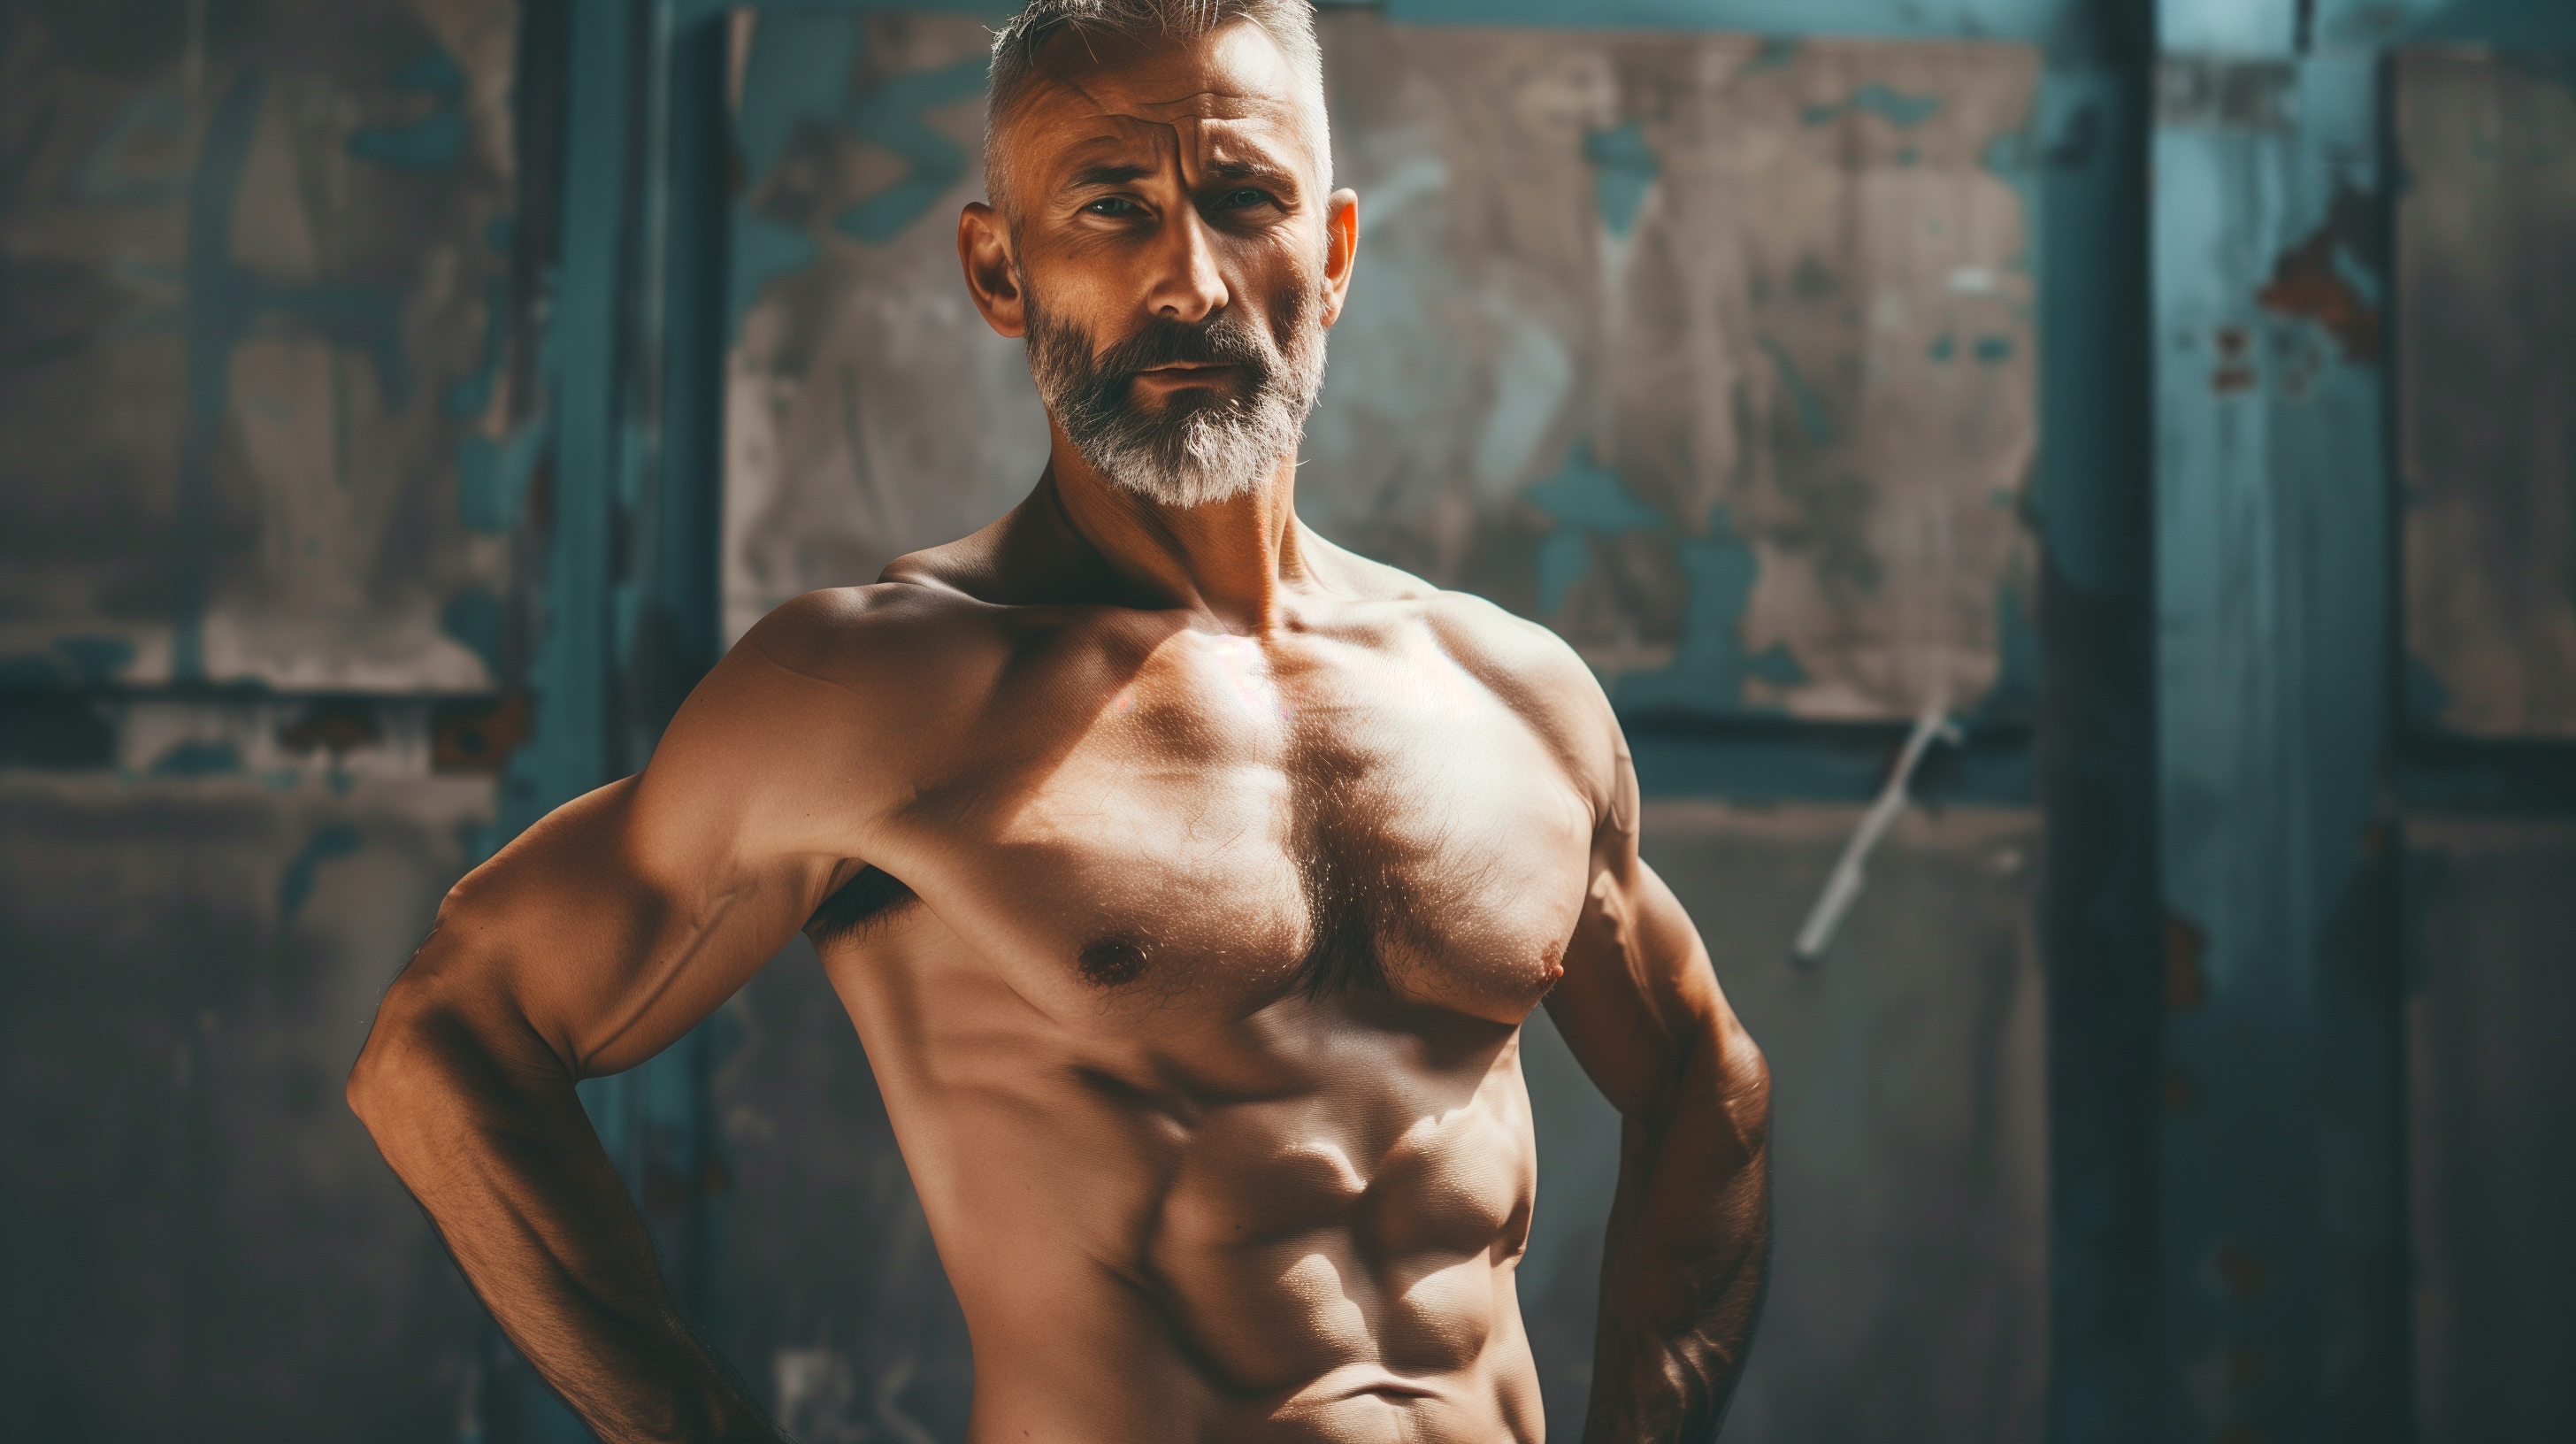 a middle-aged man with muscular arms and defined abs